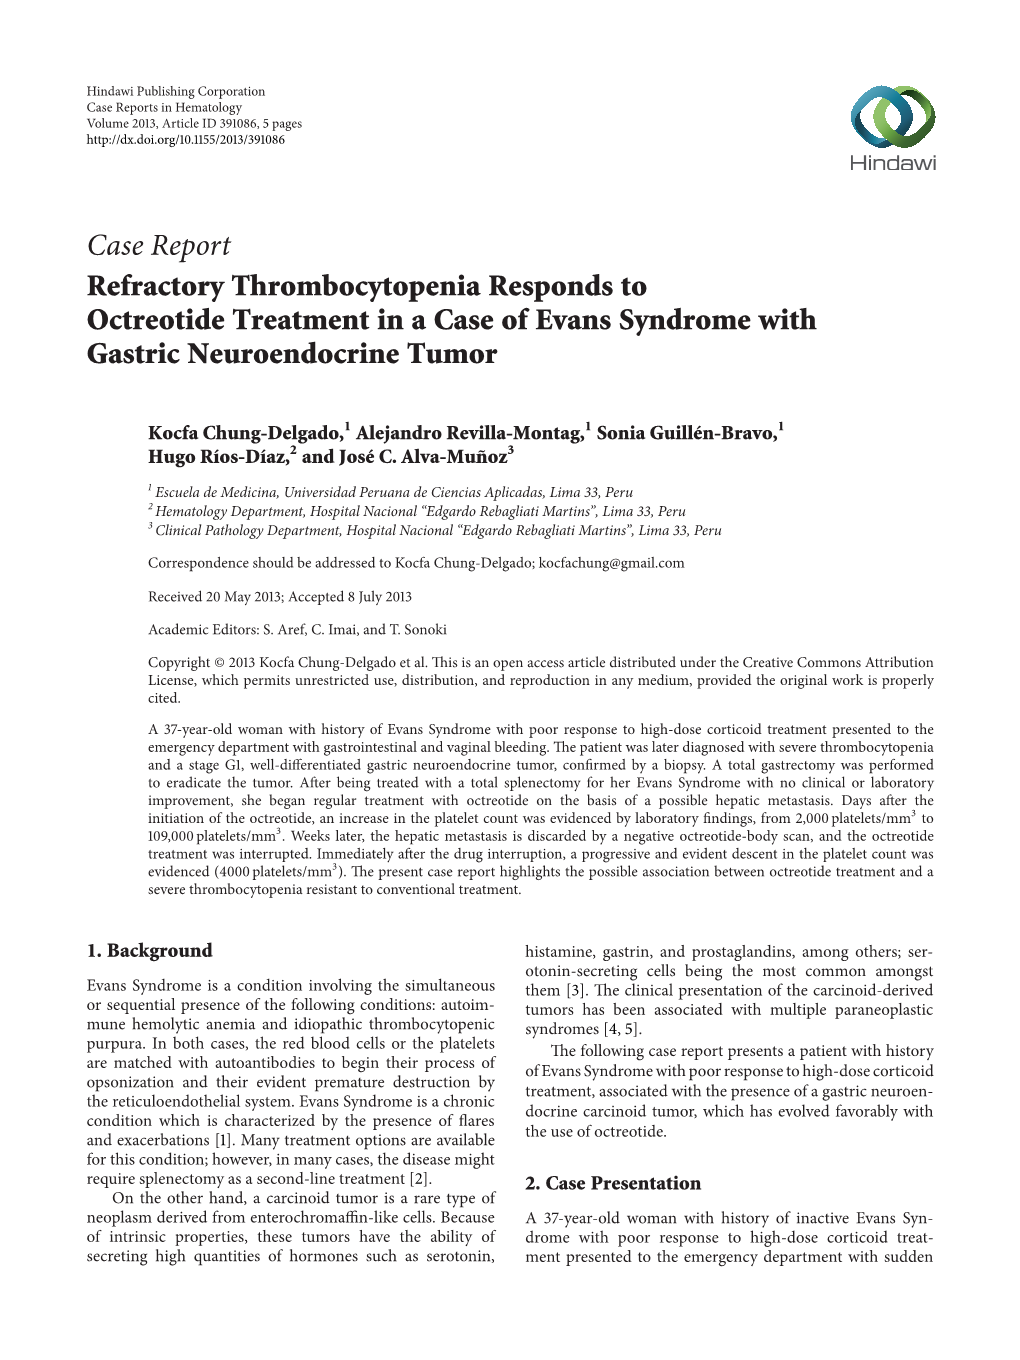 Refractory Thrombocytopenia Responds to Octreotide Treatment in a Case of Evans Syndrome with Gastric Neuroendocrine Tumor